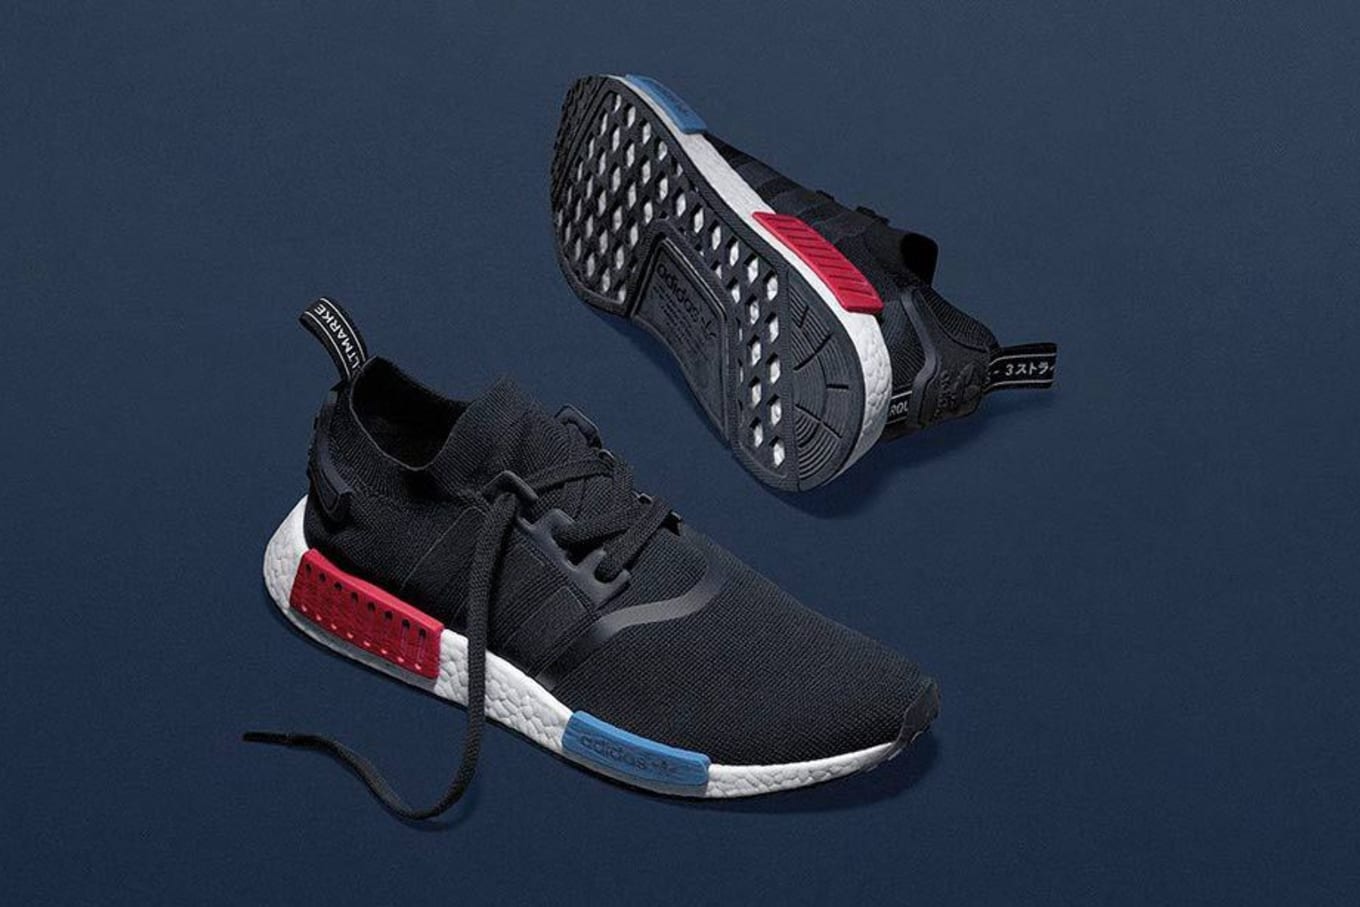 NMD OG R1 Restock Release Date | Sole Collector